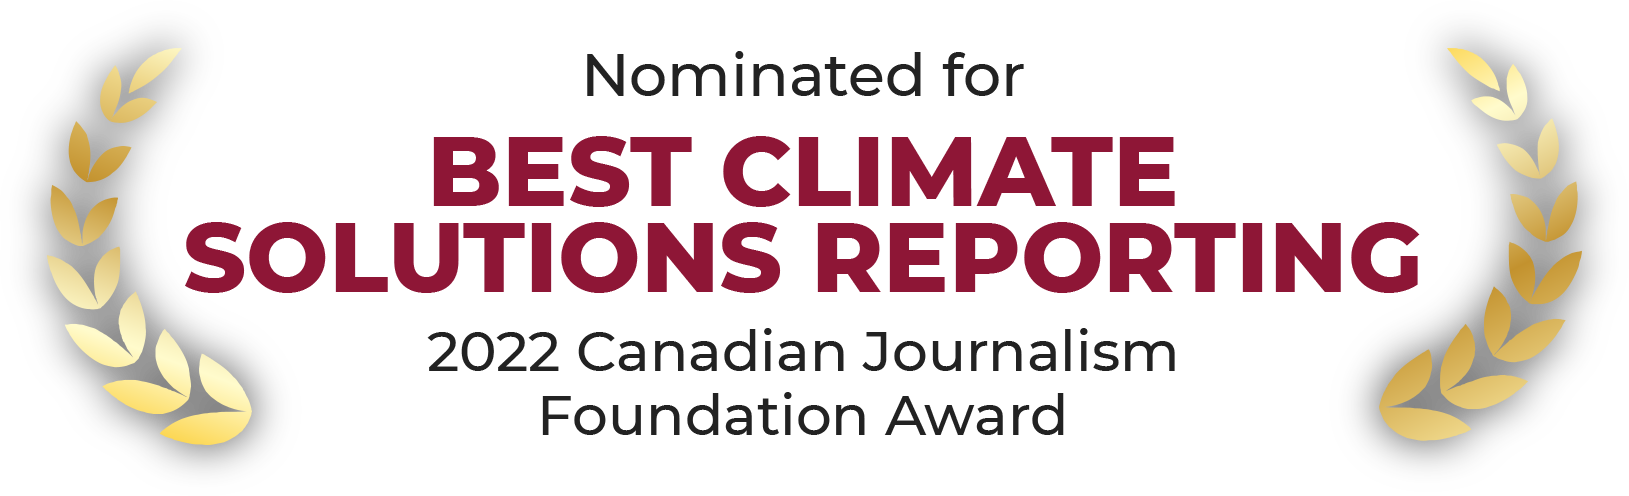 Nominated for CJF Award for Climate Solutions Reporting 2022